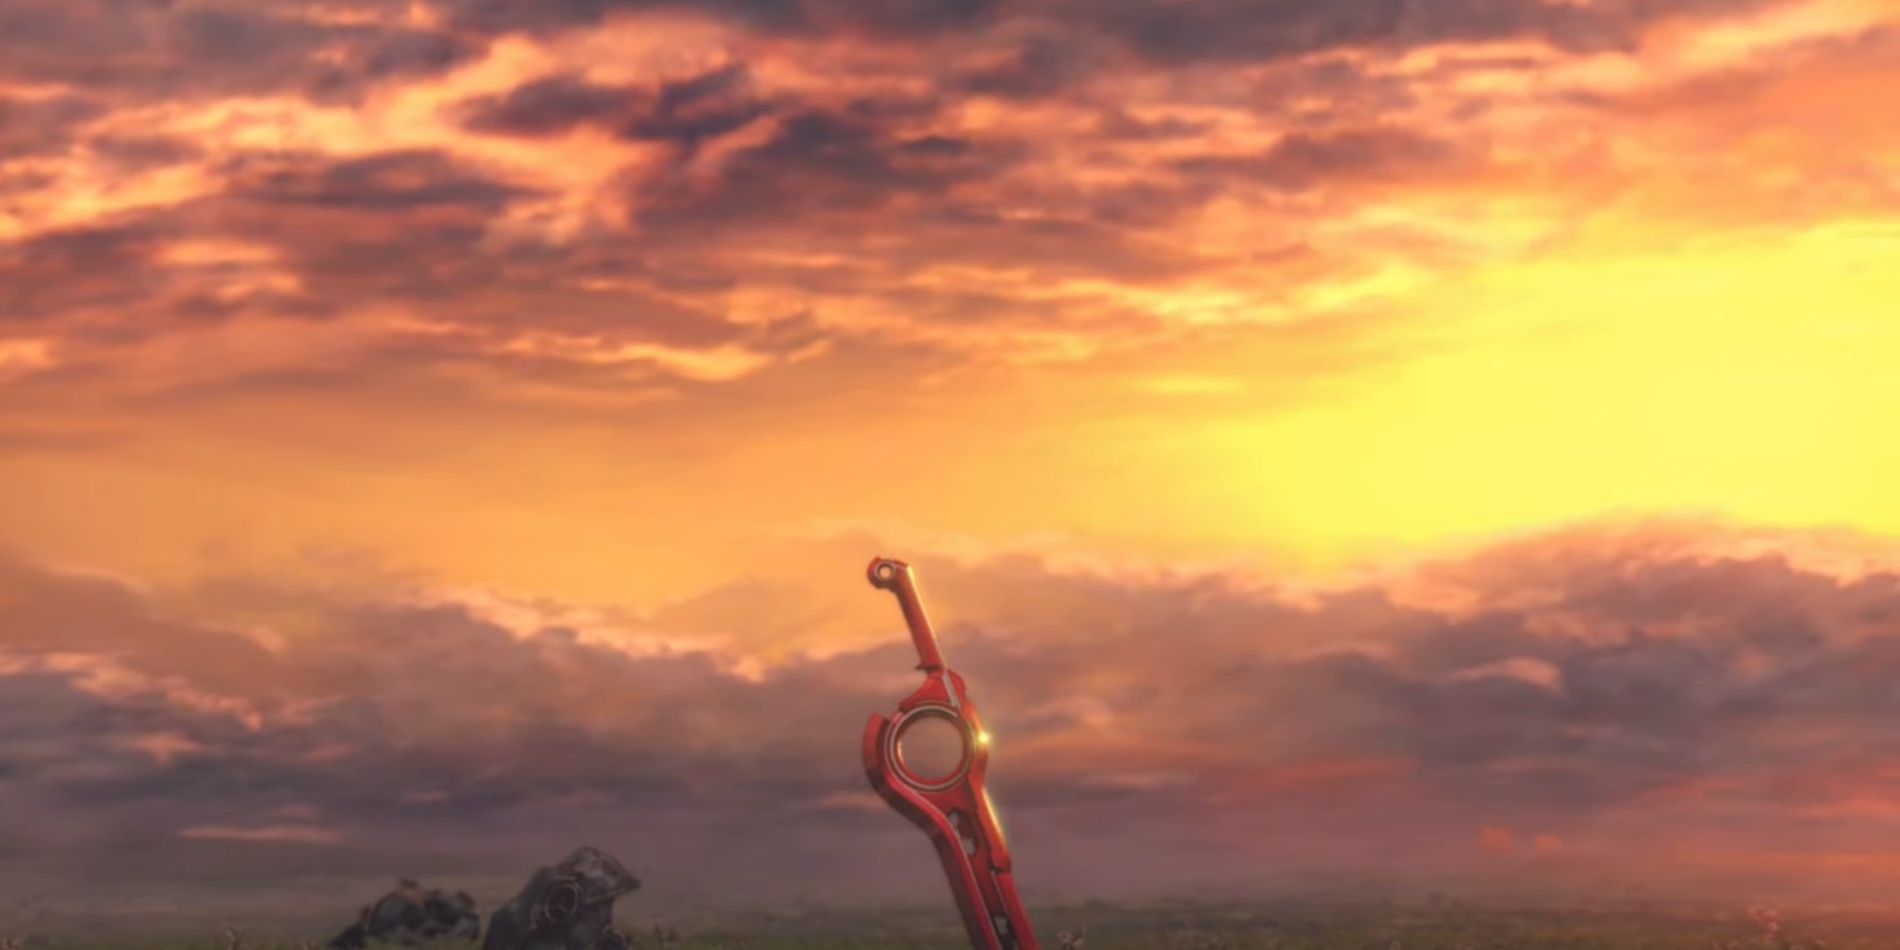 A screenshot of the Xenoblade Chronicles title screen, showing the Monado with the sunset behind it.